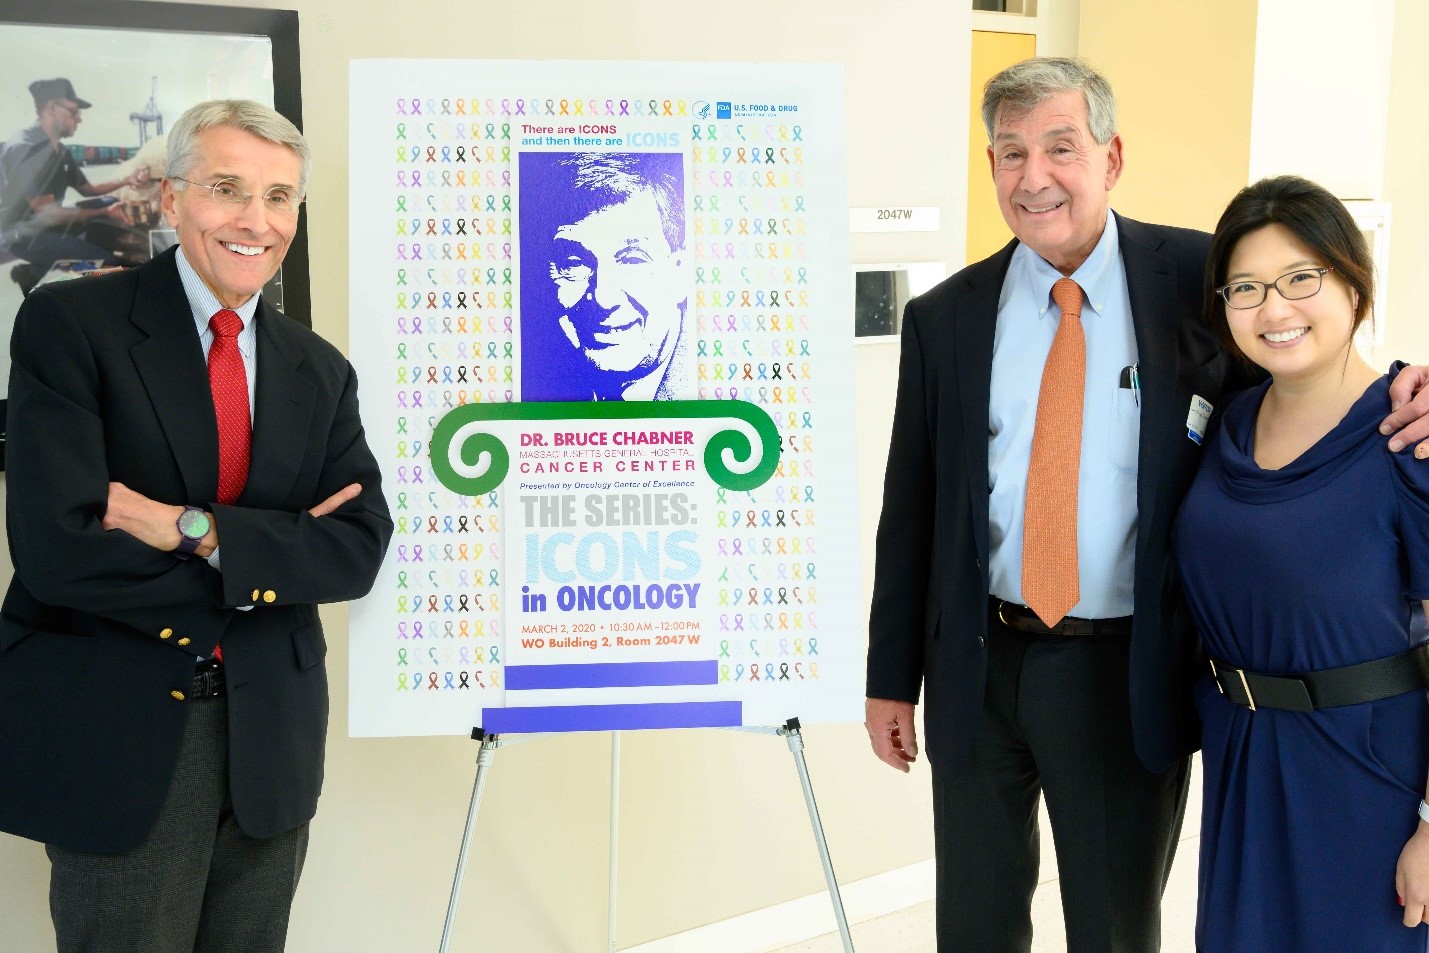 Icons in Oncology, March 2, 2020: OCE Director Richard Pazdur, MD, welcomed Bruce Chabner, MD, who discussed early oncology drug development from the 1970s through the current era.